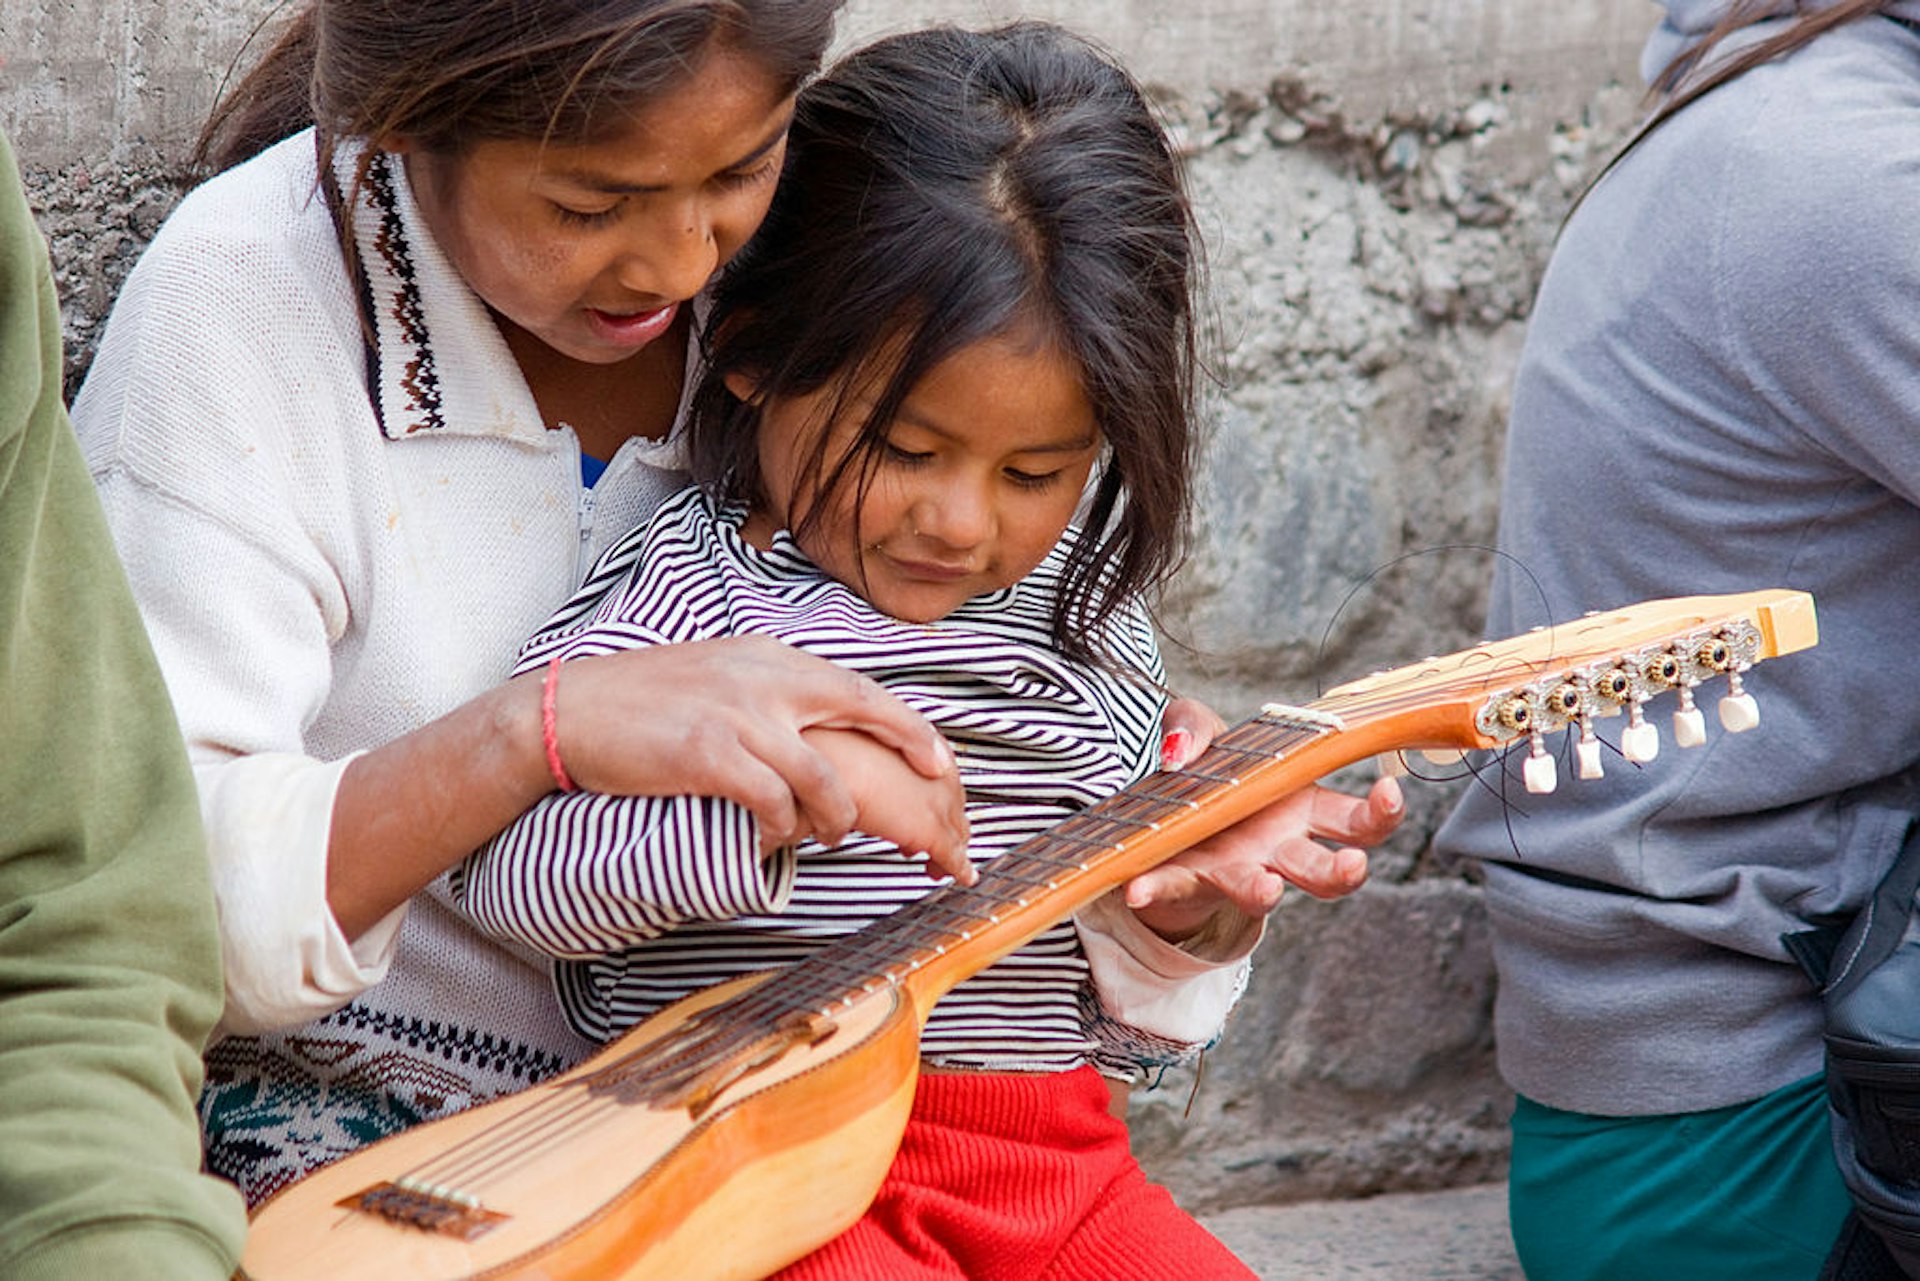 Little Quechua girls playing with a charango, an Andean lute instrument in Iruya (Argentina). Iruya is a beautiful but very remote village in the Quebrada de Humahuaca, in Northern Argentina